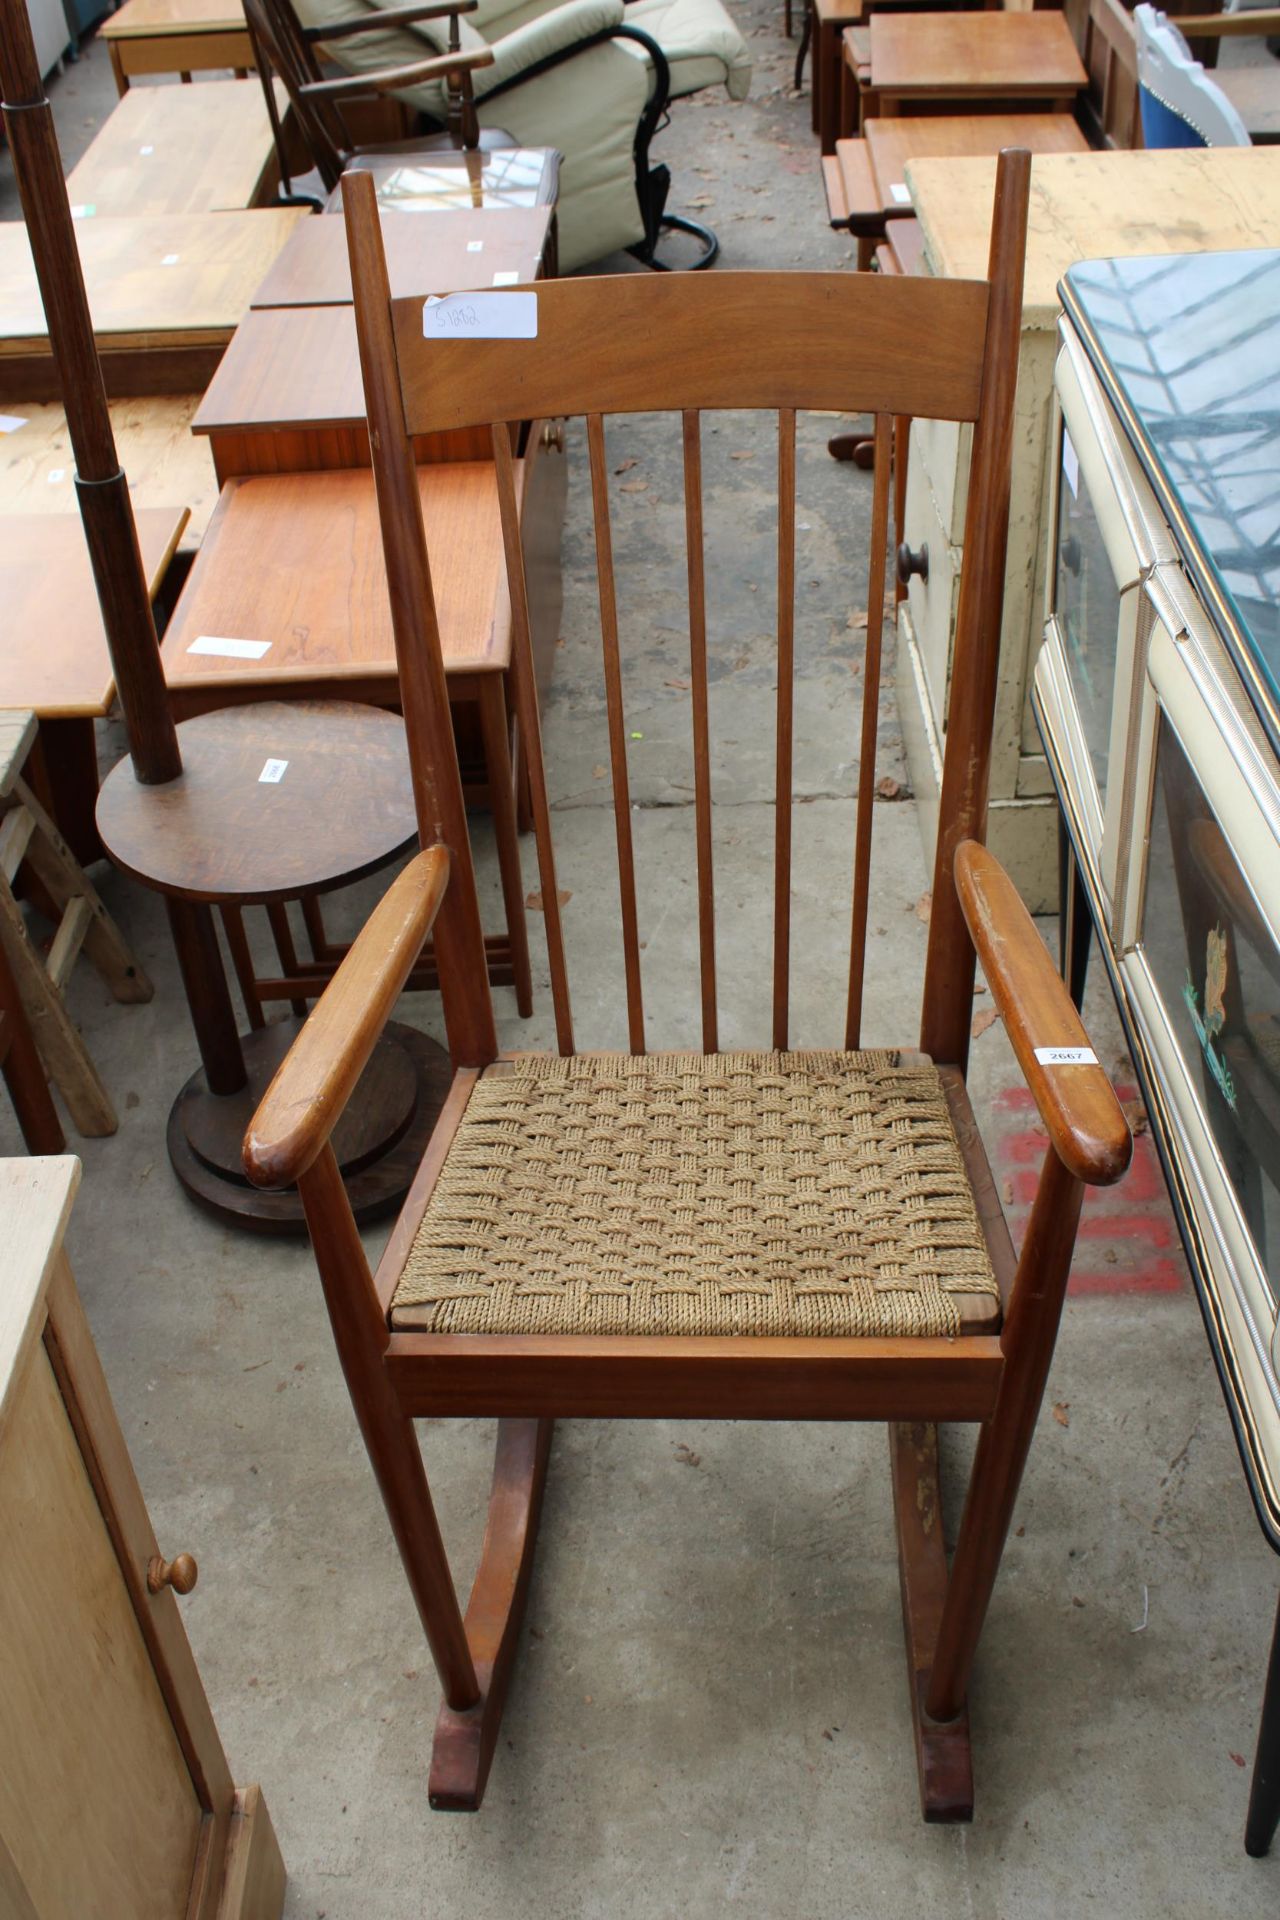 A MID 20TH CENTURY HARDWOOD ROCKING CHAIR WITH DROP-IN WOVEN SEAT - Image 2 of 2